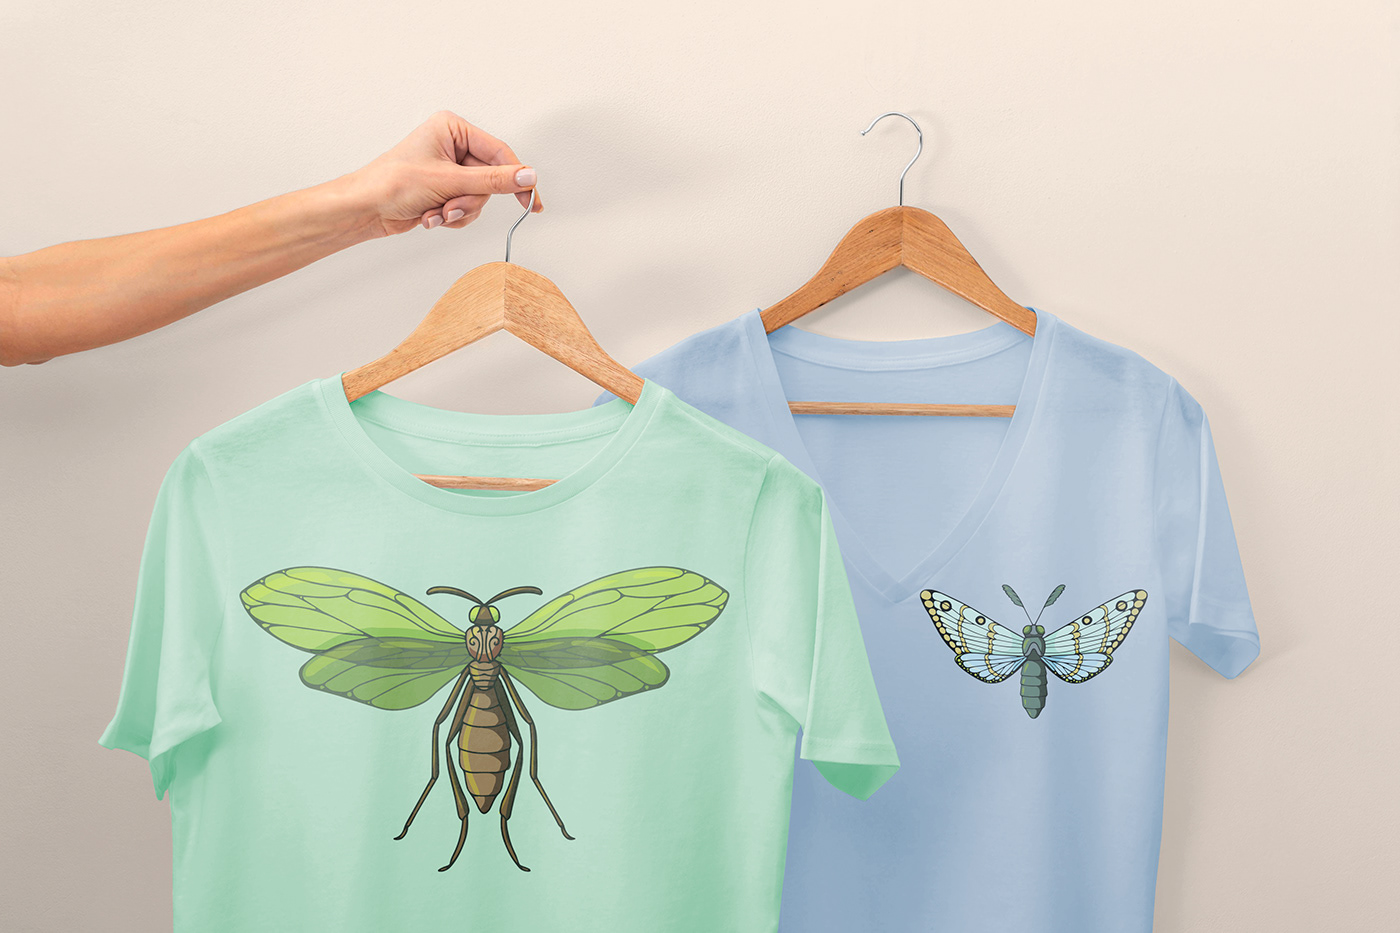 beautiful insects bug butterfly cicada dragonfly Insects Patterns